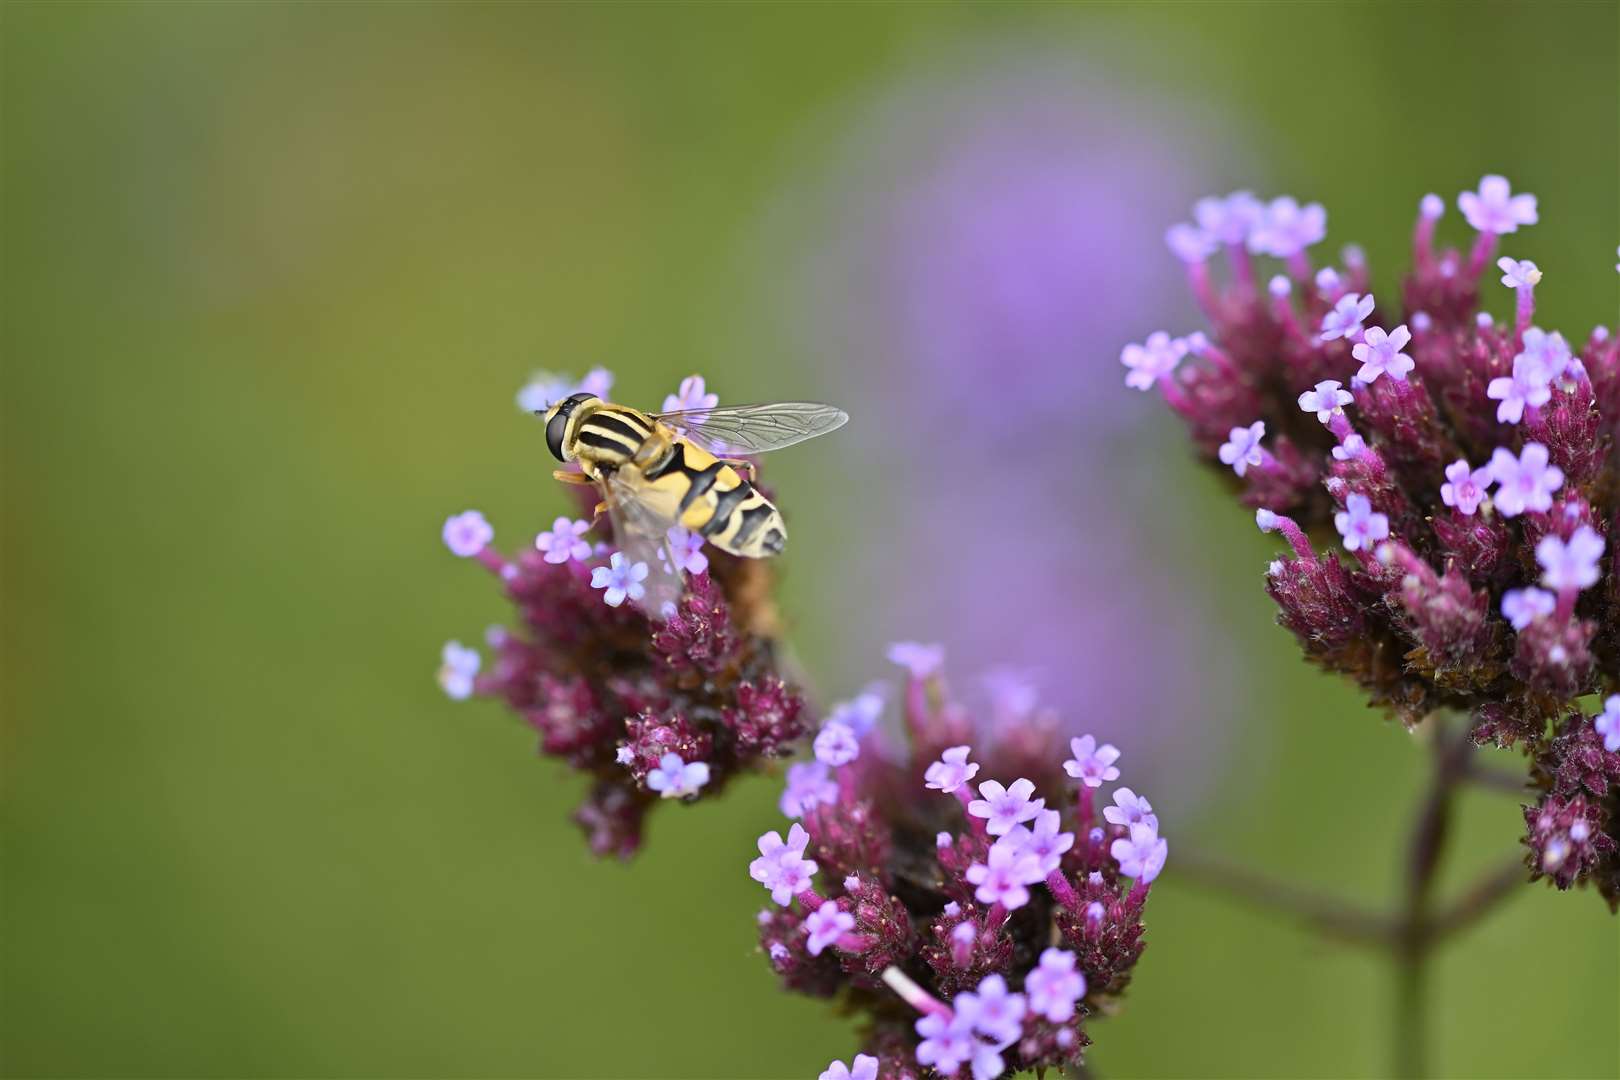 Flying insects had a poor year in the heat and drought, the Trust said (Steve Franklin/National Trust Images/PA)